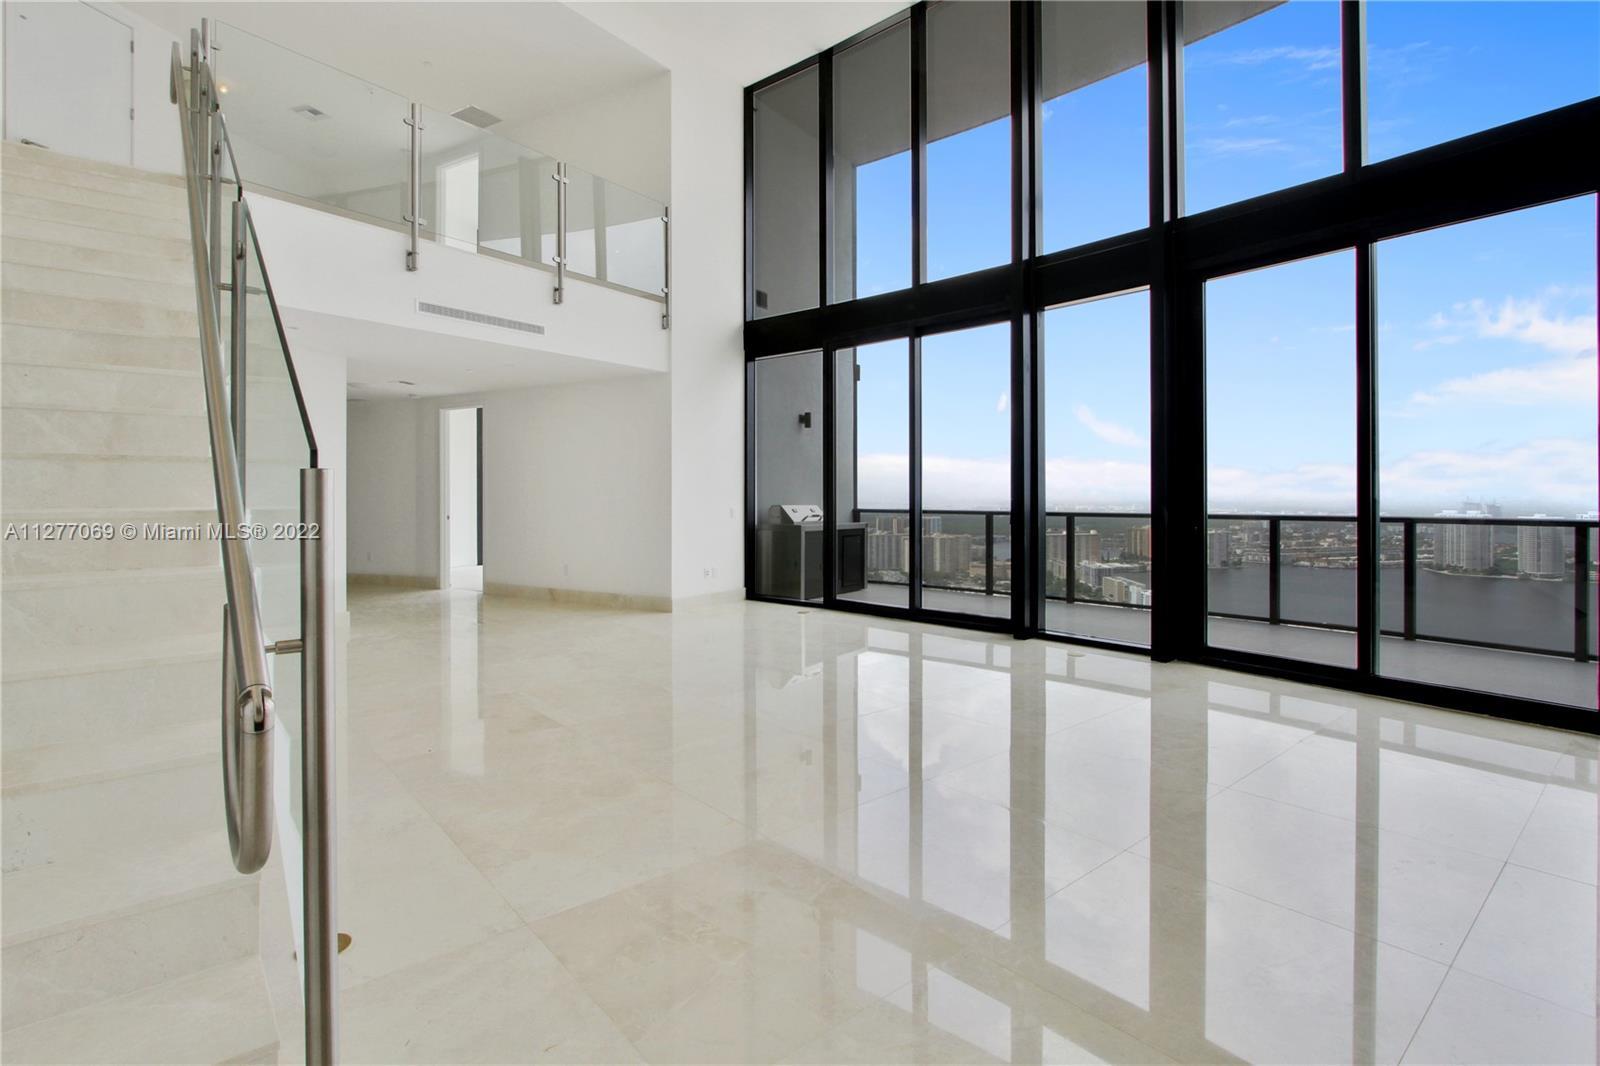 One of the few duplex residences with dramatic 22ft ceilings. Duplex are only 40th floor and up. 
T